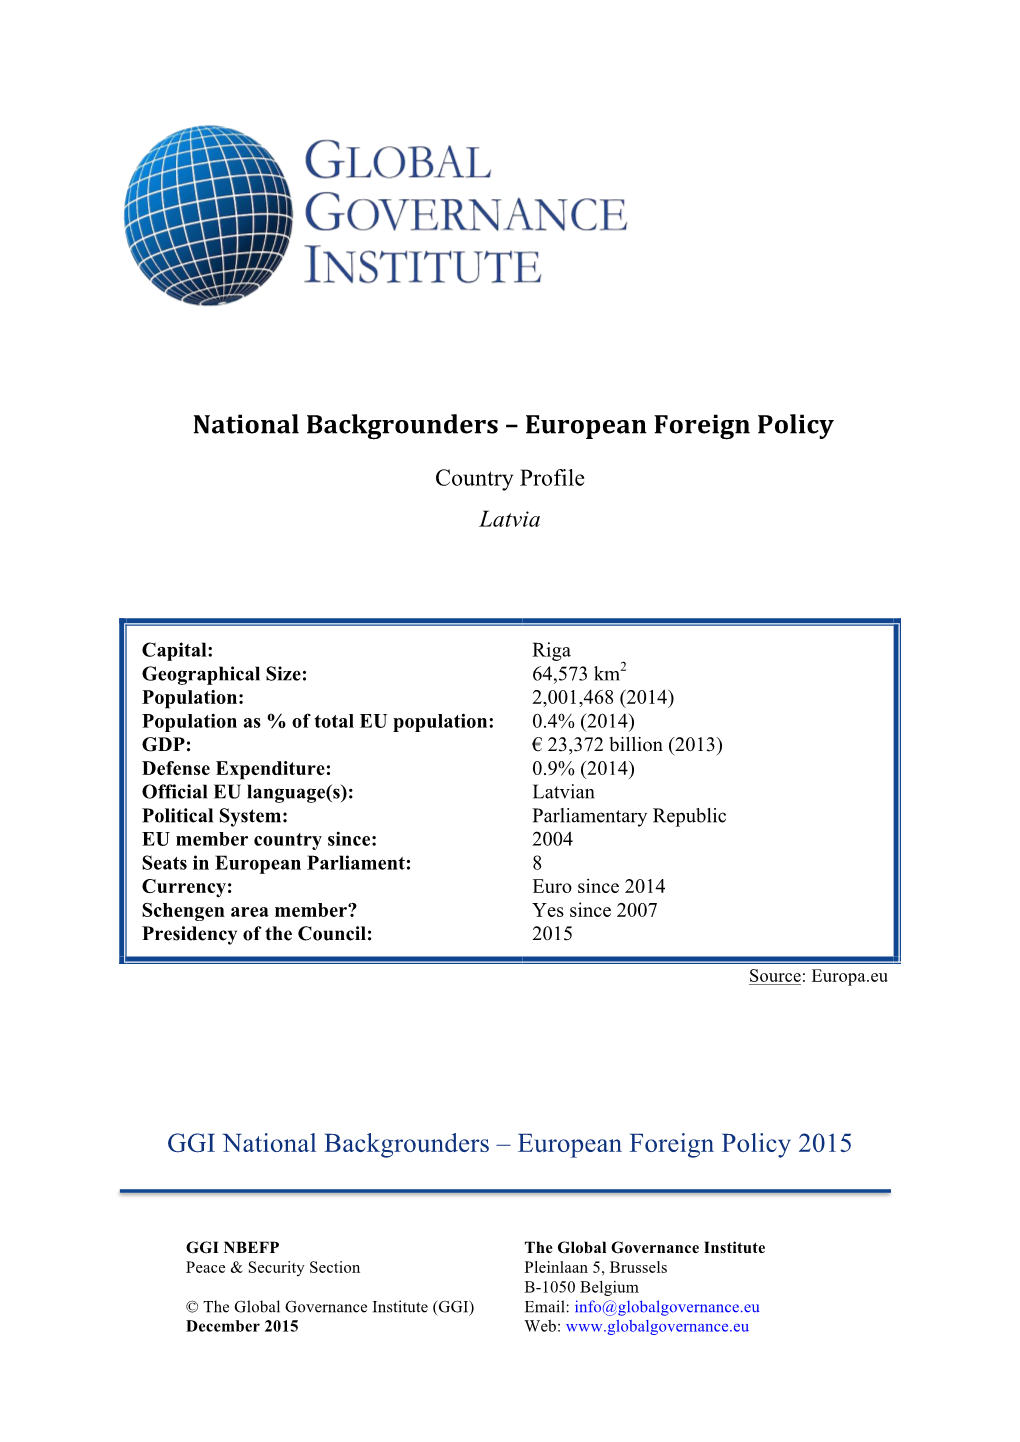 European Foreign Policy GGI National Backgrounders